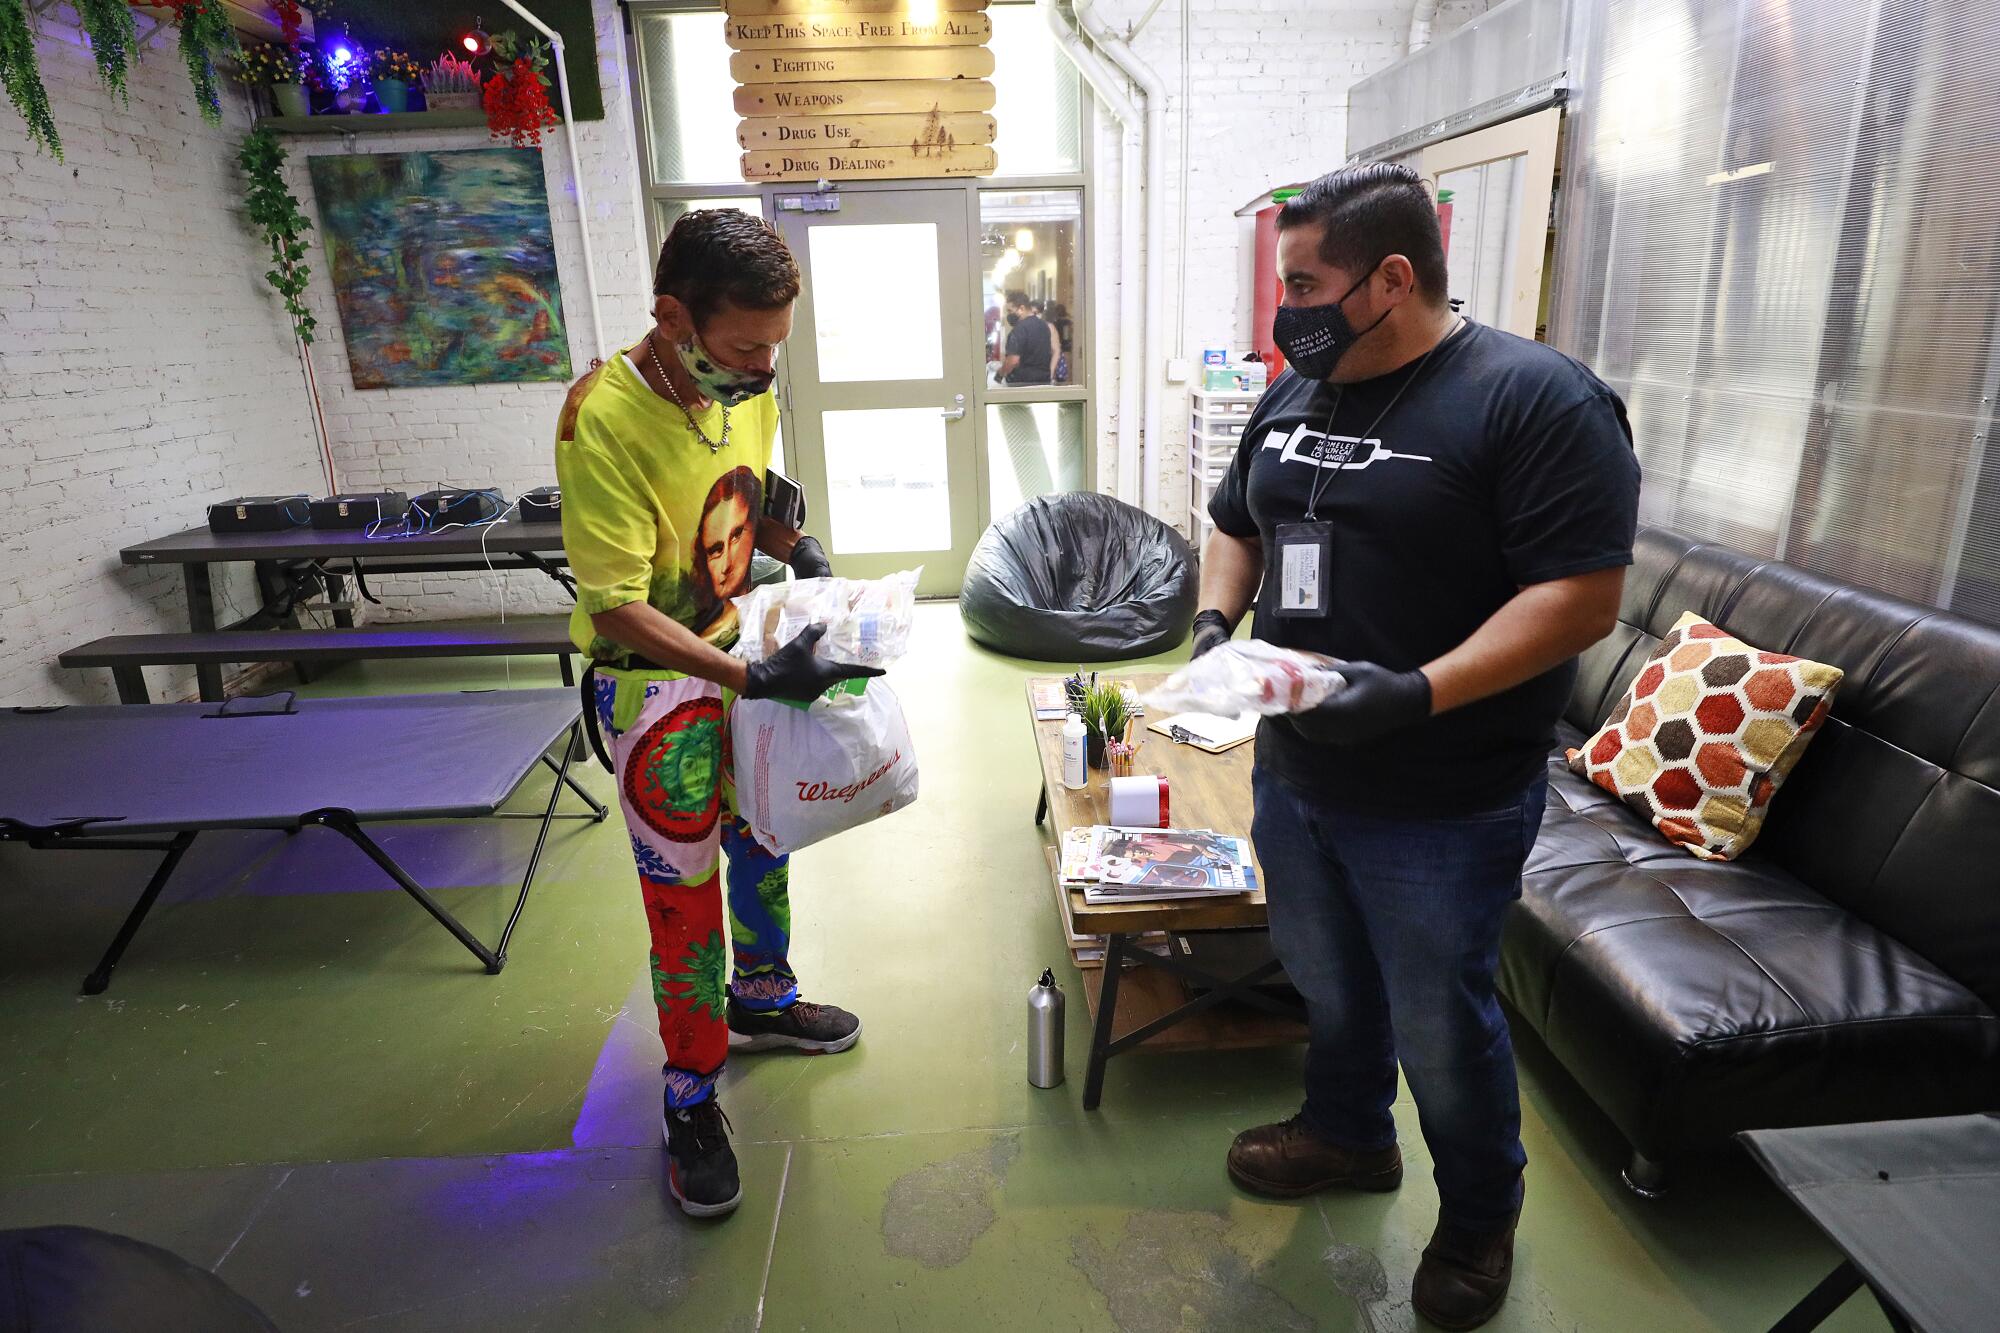 Diamond Mendoza, left, receives healthcare items from Christian Diaz at the Center for Harm Reduction drop-in center